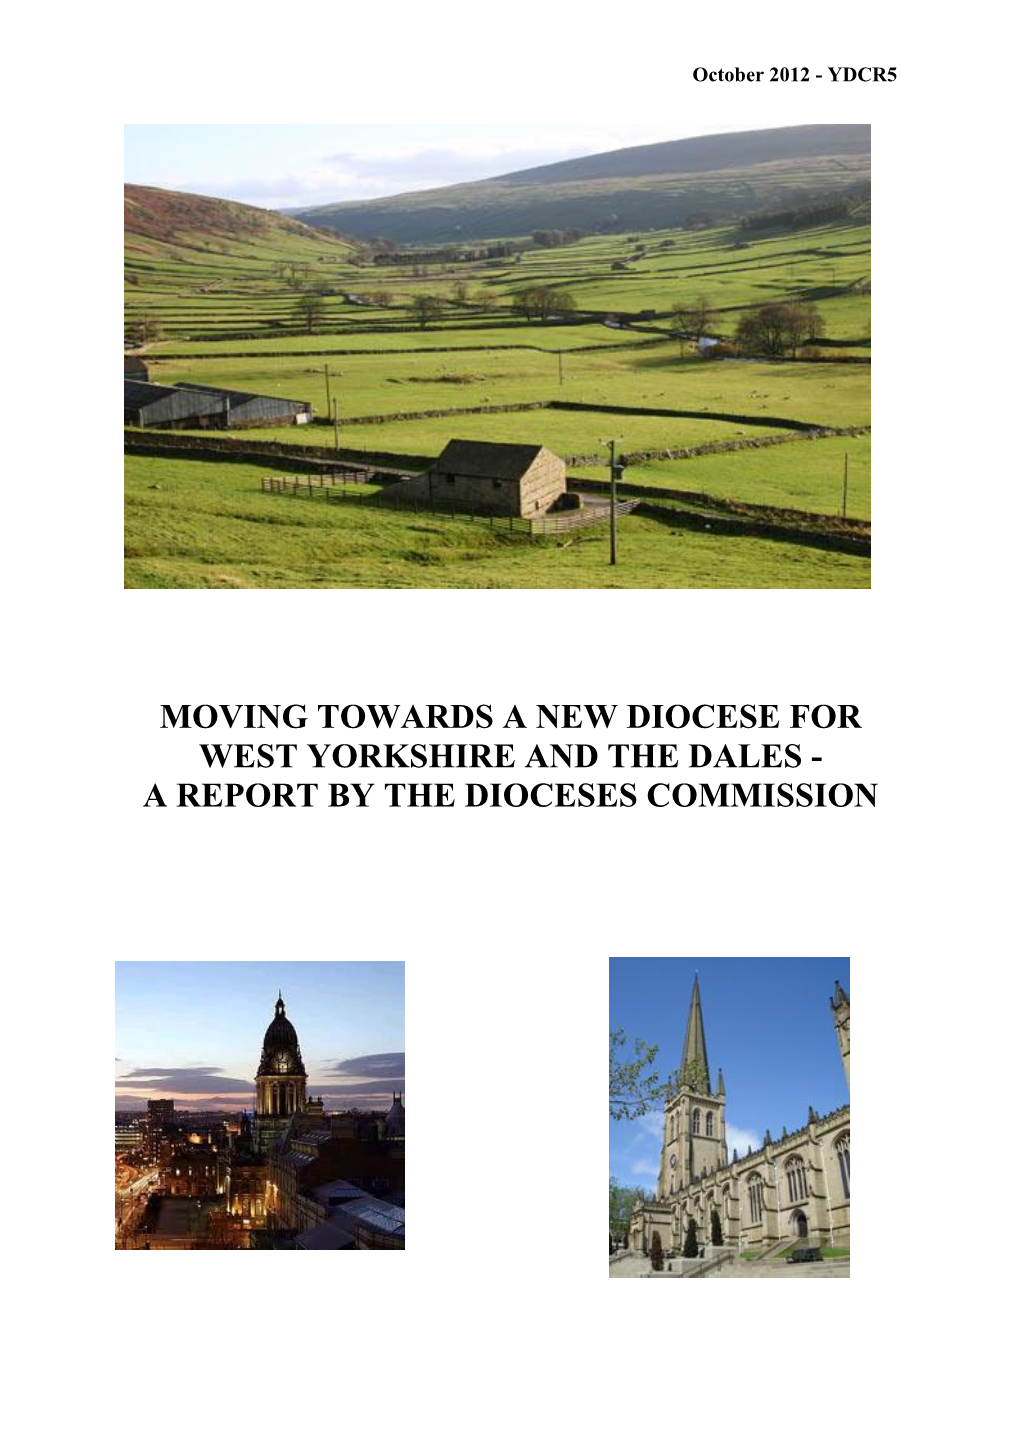 Moving Towards a New Diocese for West Yorkshire and the Dales - a Report by the Dioceses Commission